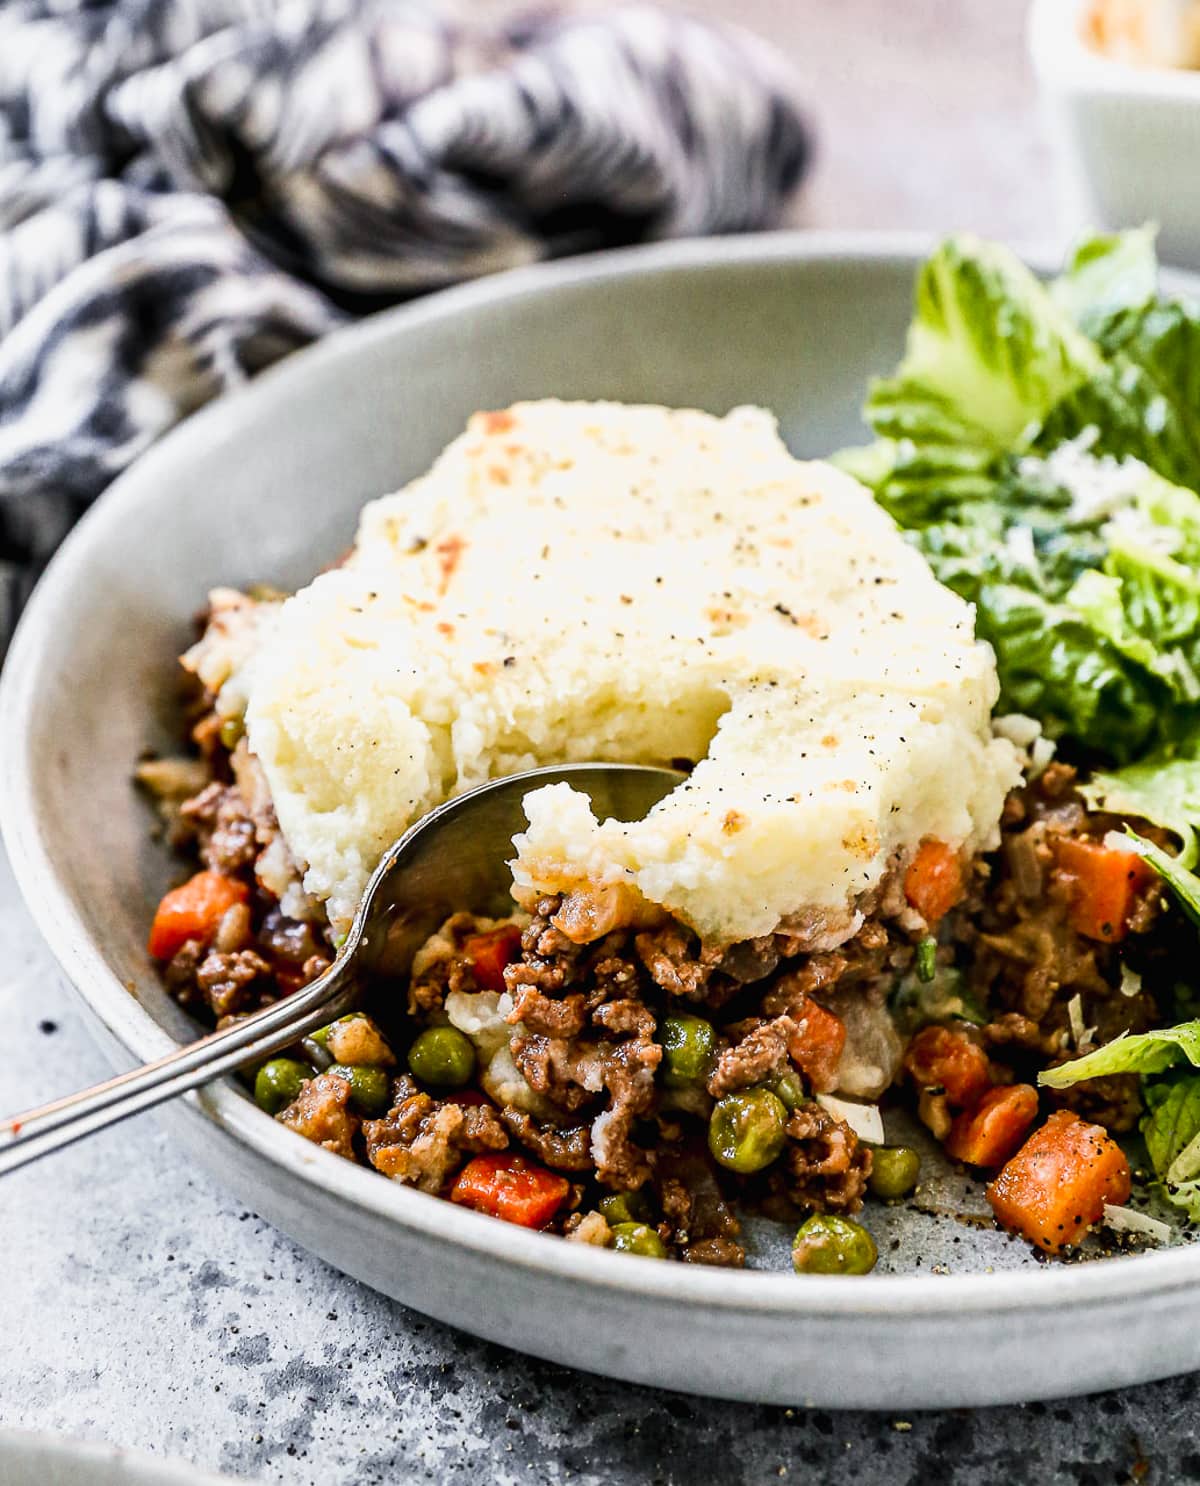 a slice of easy shepherd's pie with a hearty ground meat filling and mashed potato topping